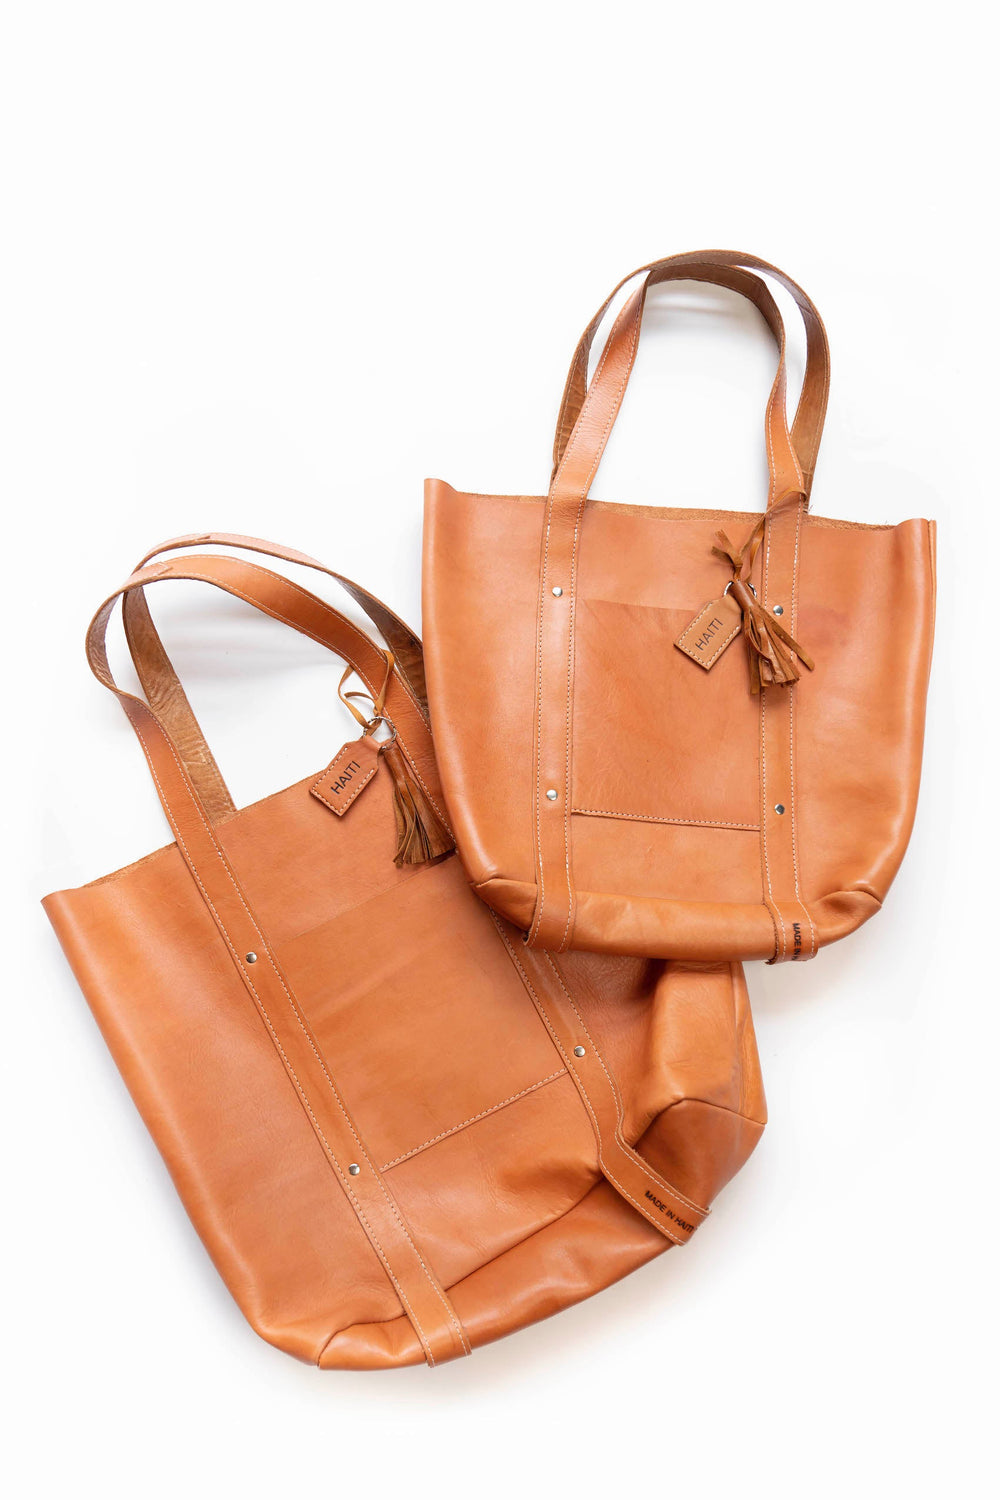 XL Raw Leather Tote by 2nd Story Goods